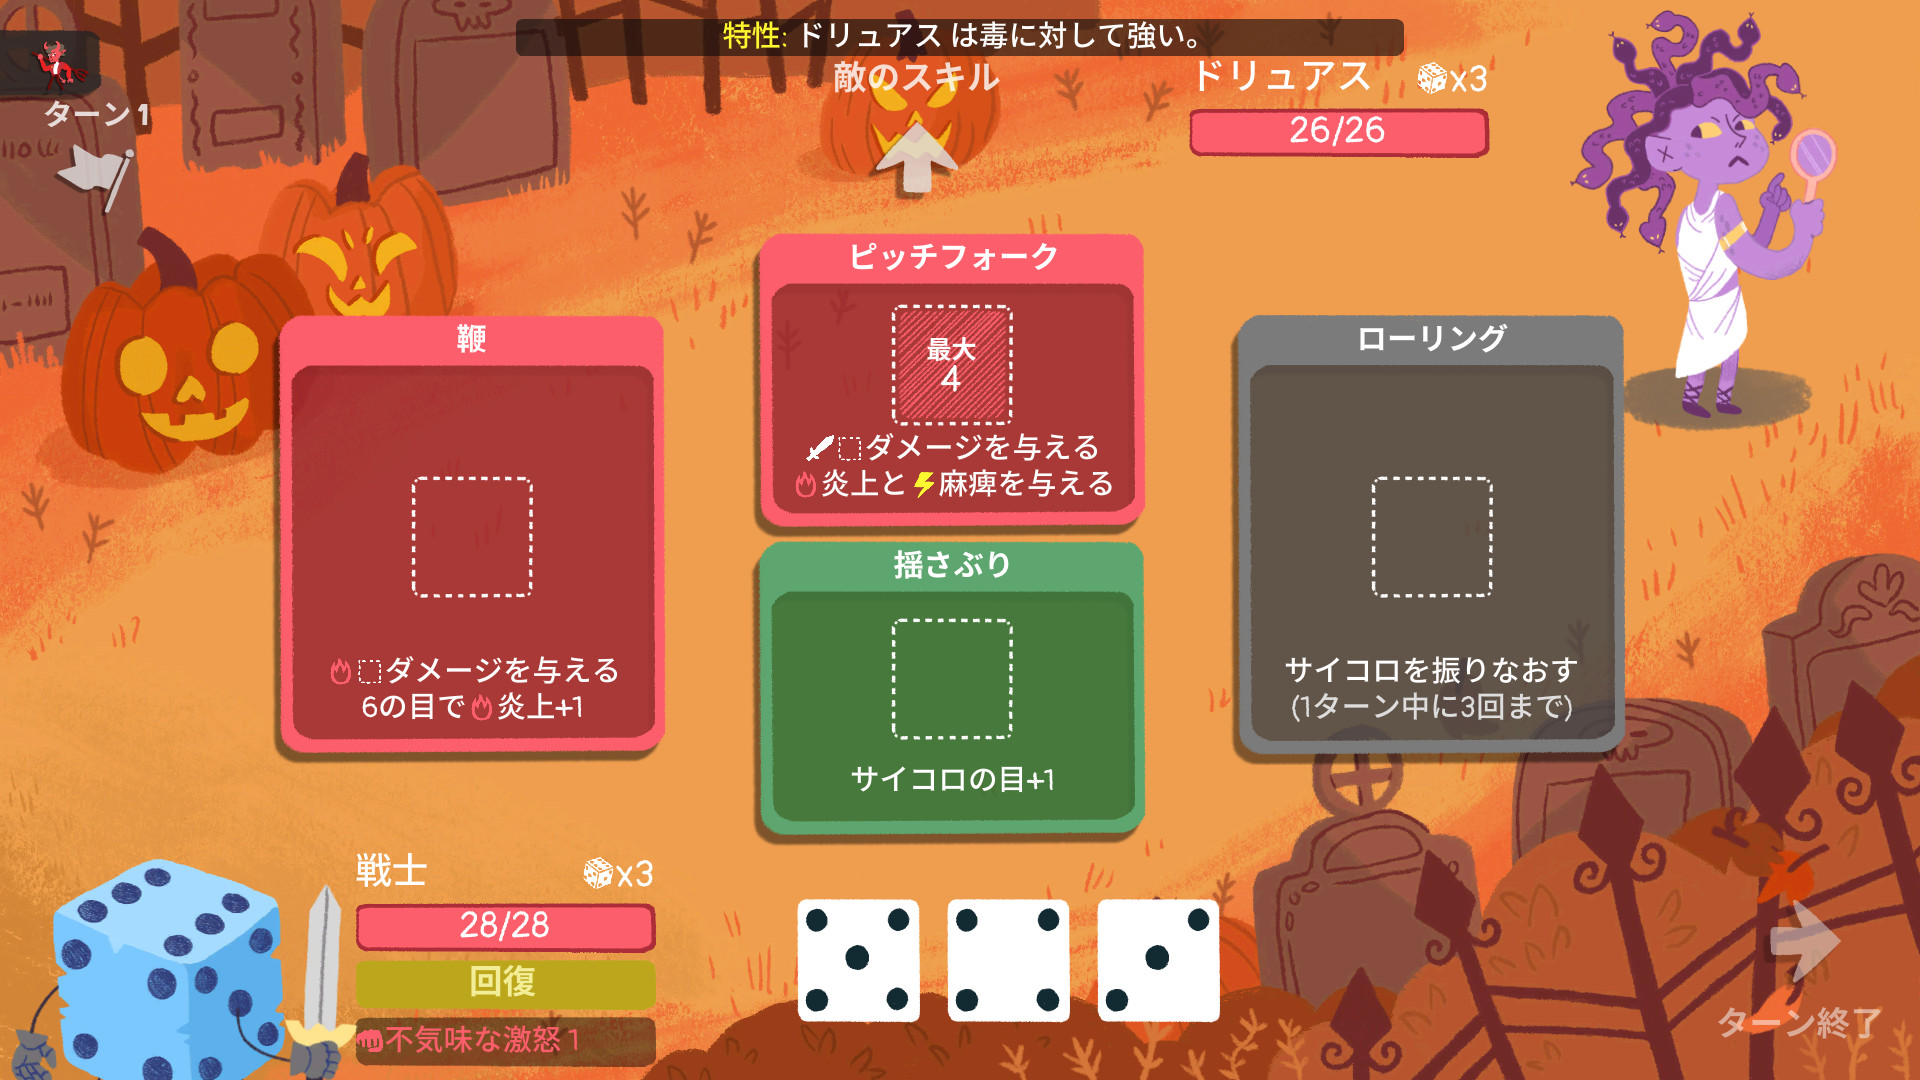 Steam で 50 オフ Dicey Dungeons